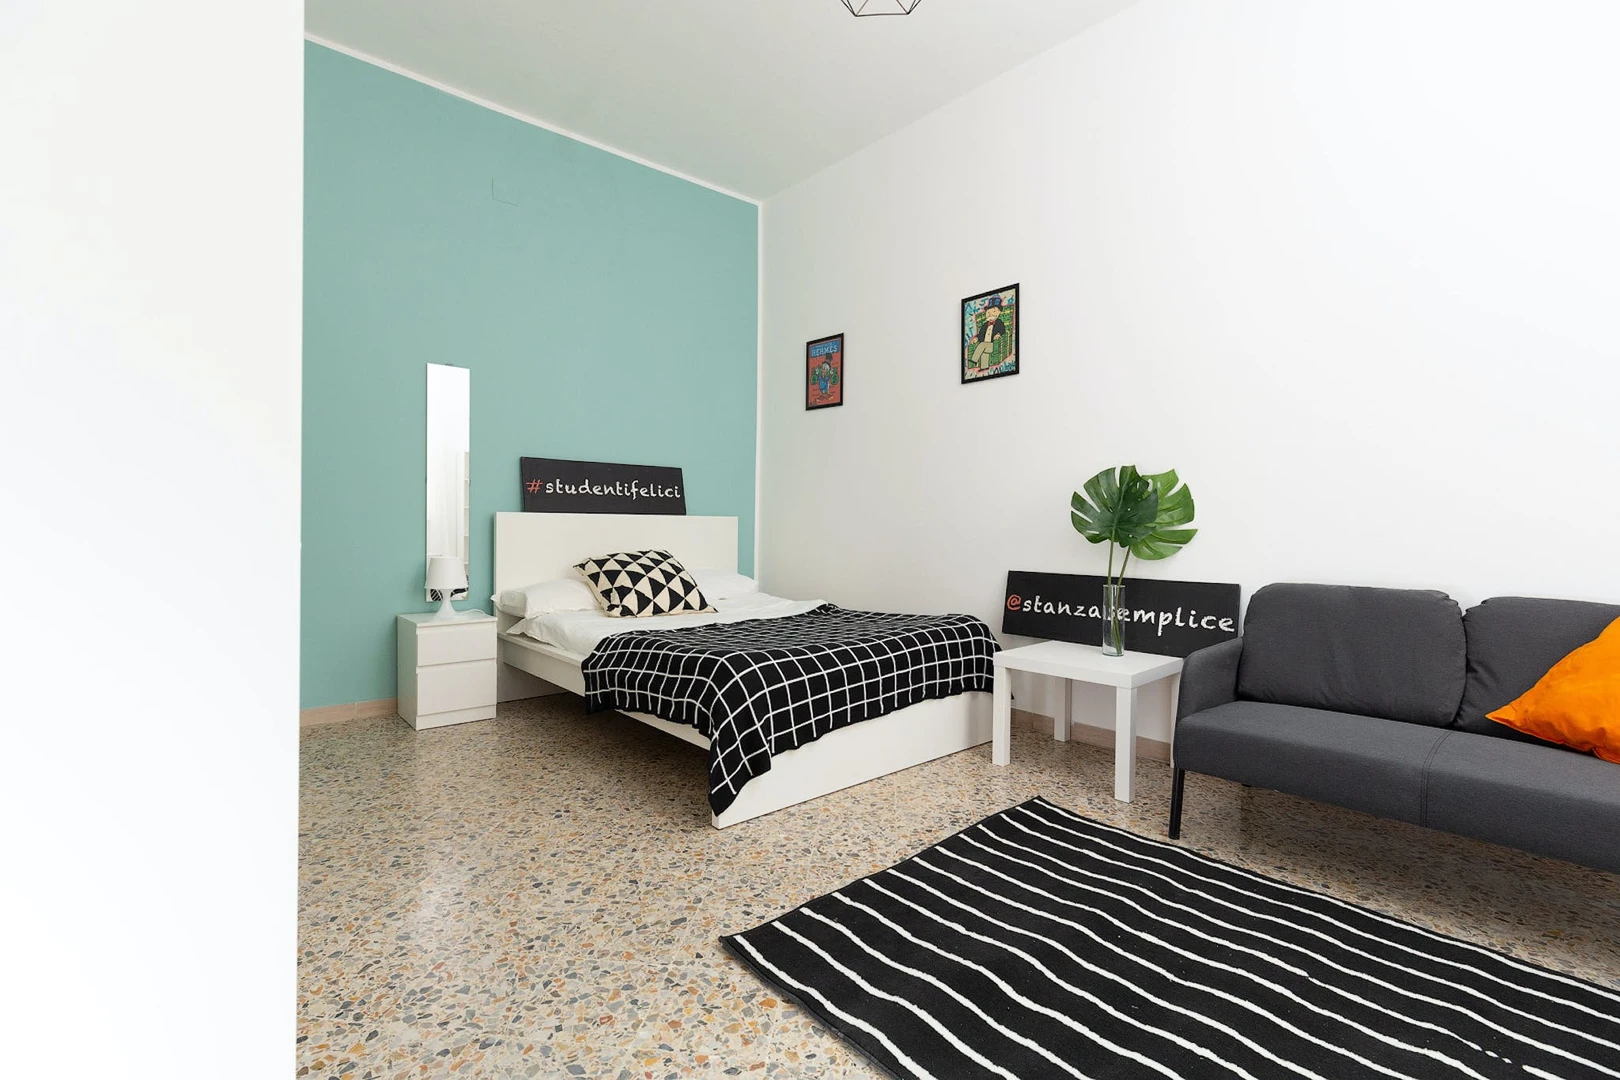 Renting rooms by the month in rimini